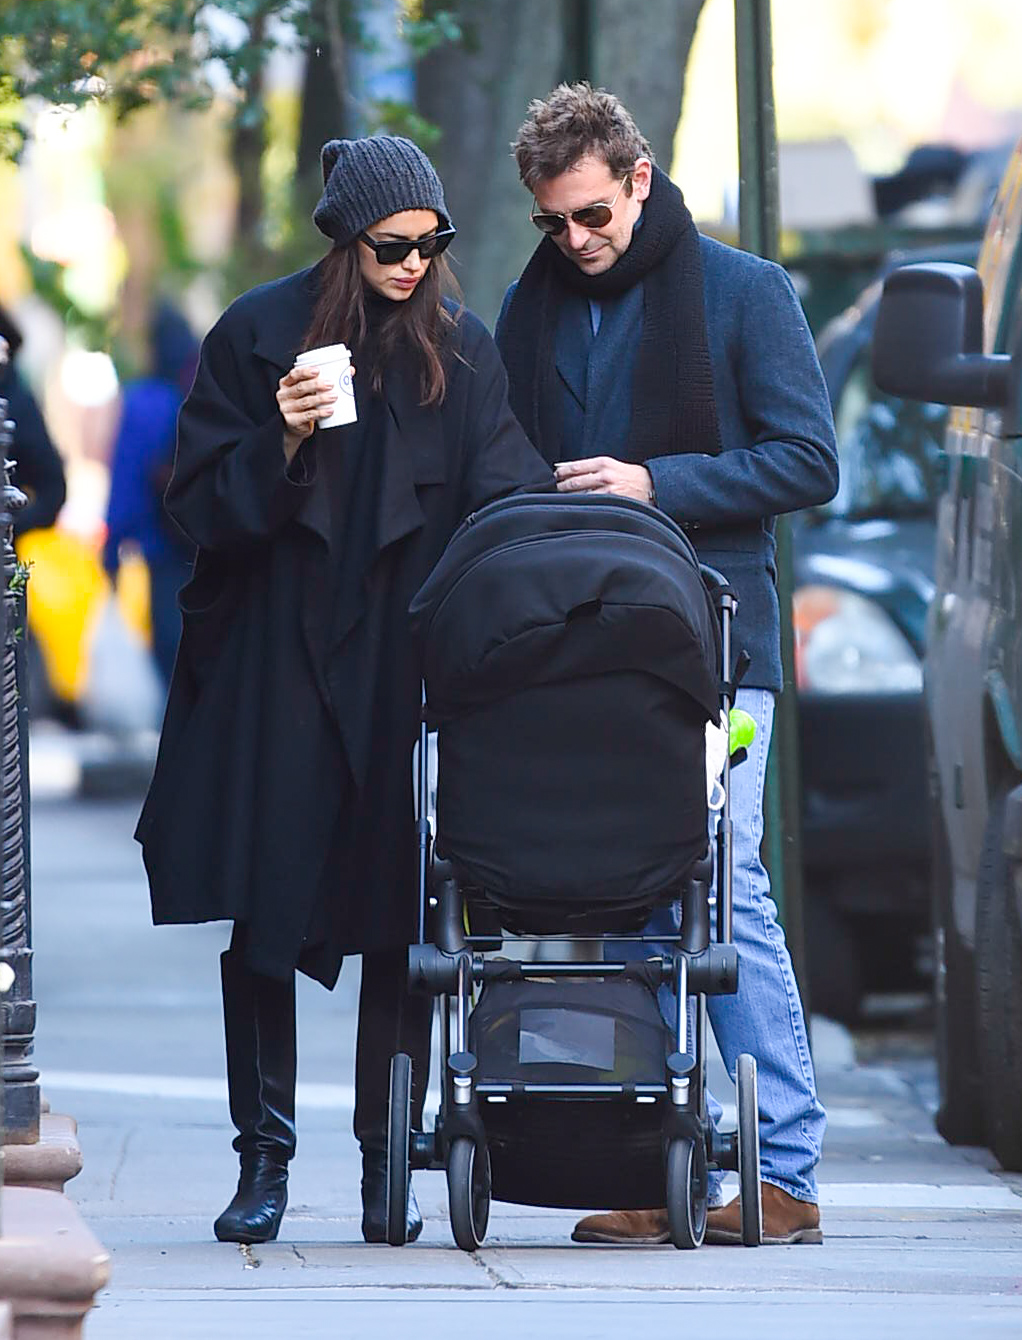 Bradley Cooper and Irina Shayk in Soho on October 24, 2018 in New York City. | Source: Getty Images